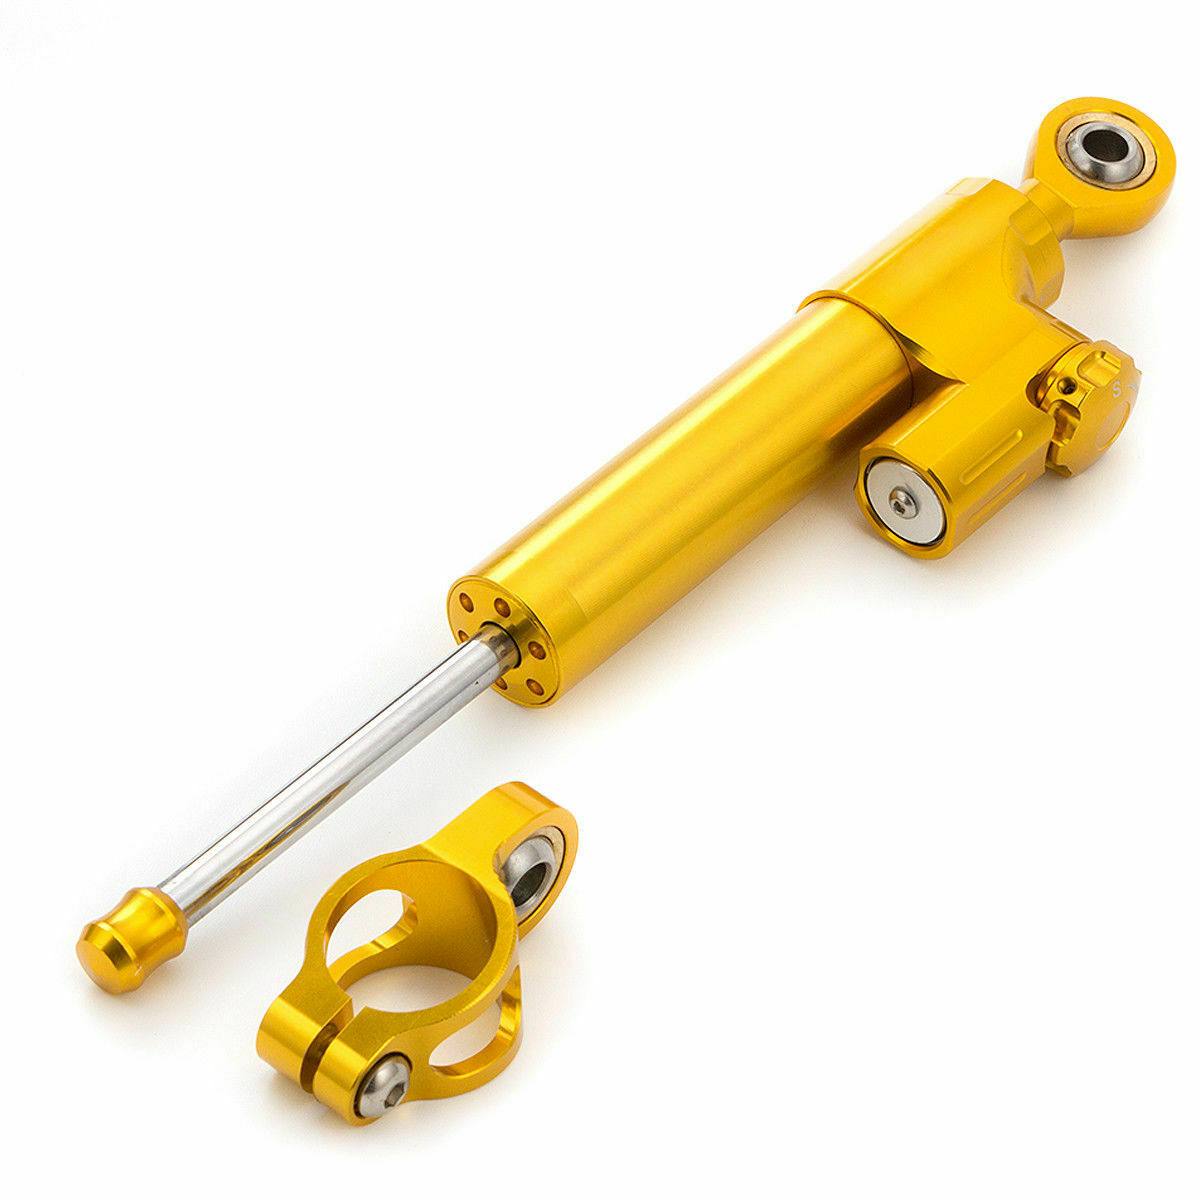 Gold Universal CNC Steering Damper Motorcycle Linear Stabilizer Reversed Safety Control - TDRMOTO